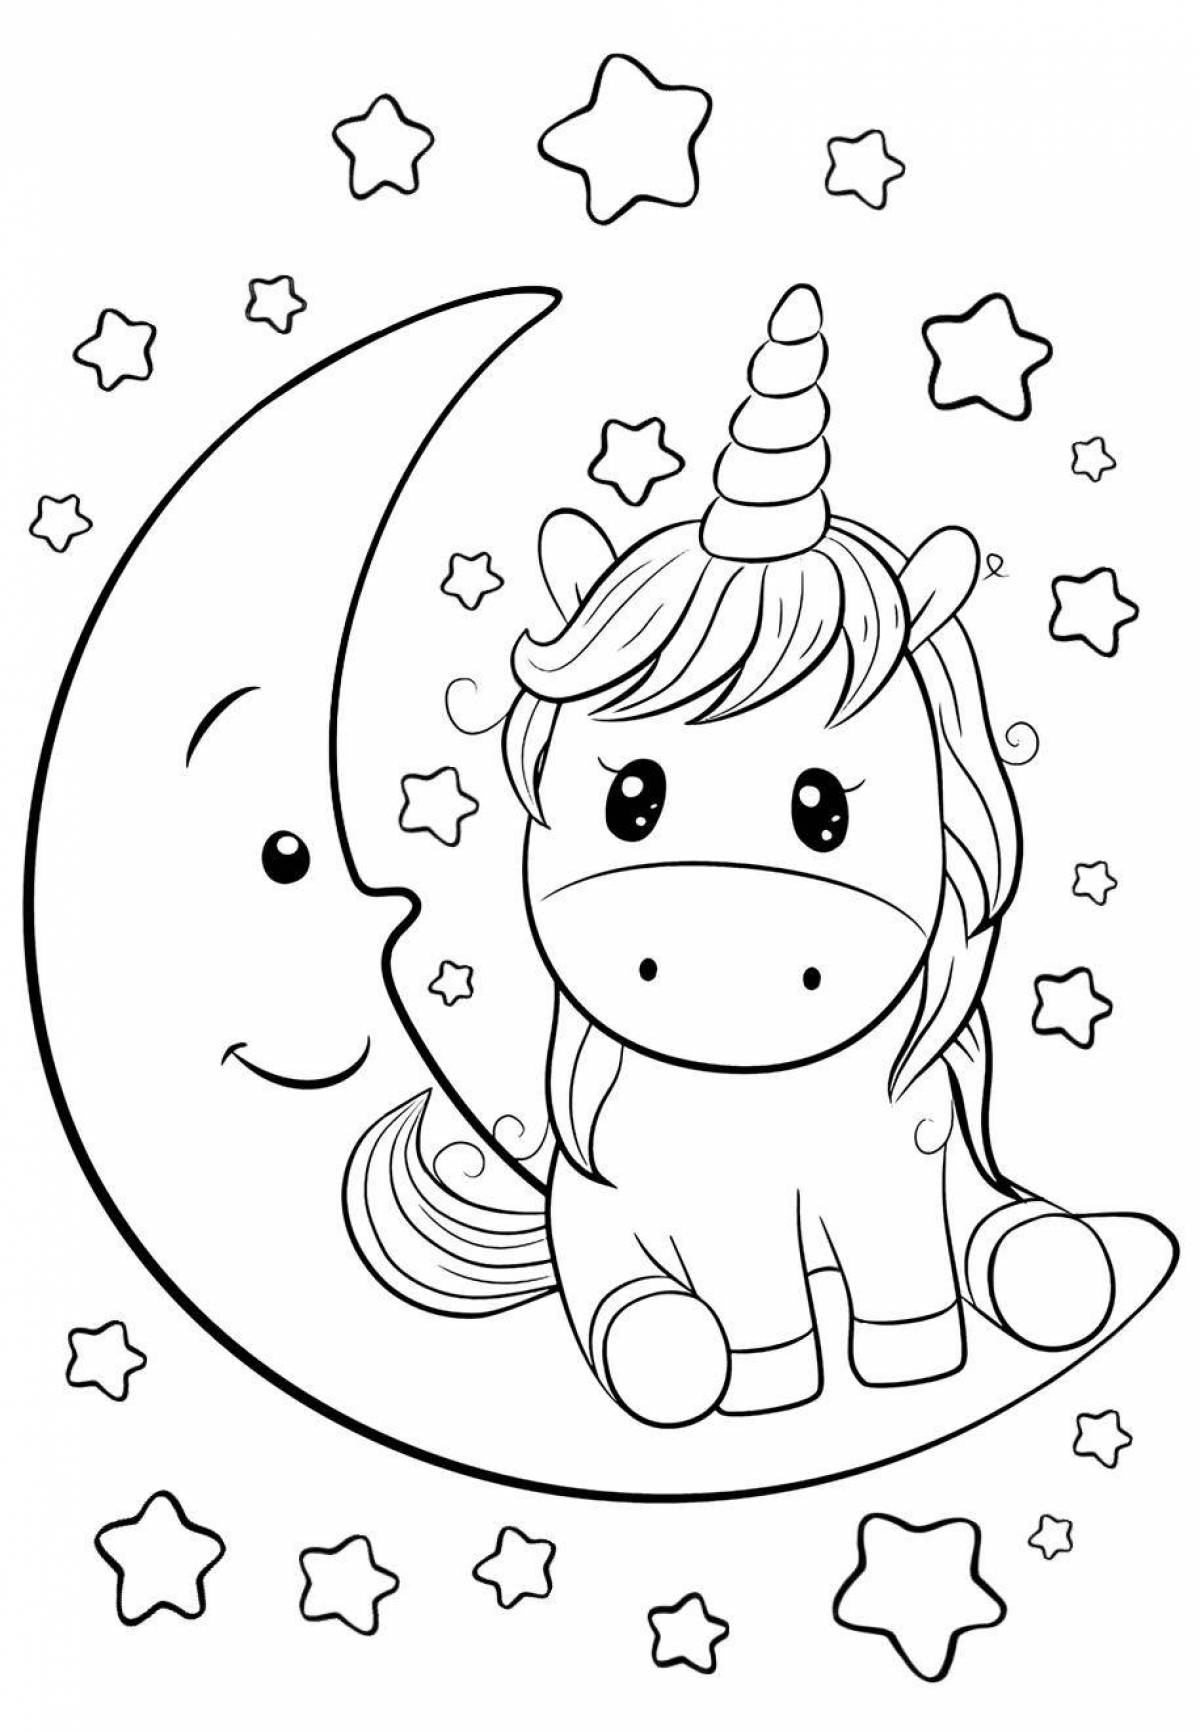 Coloring book for girls with unicorn print